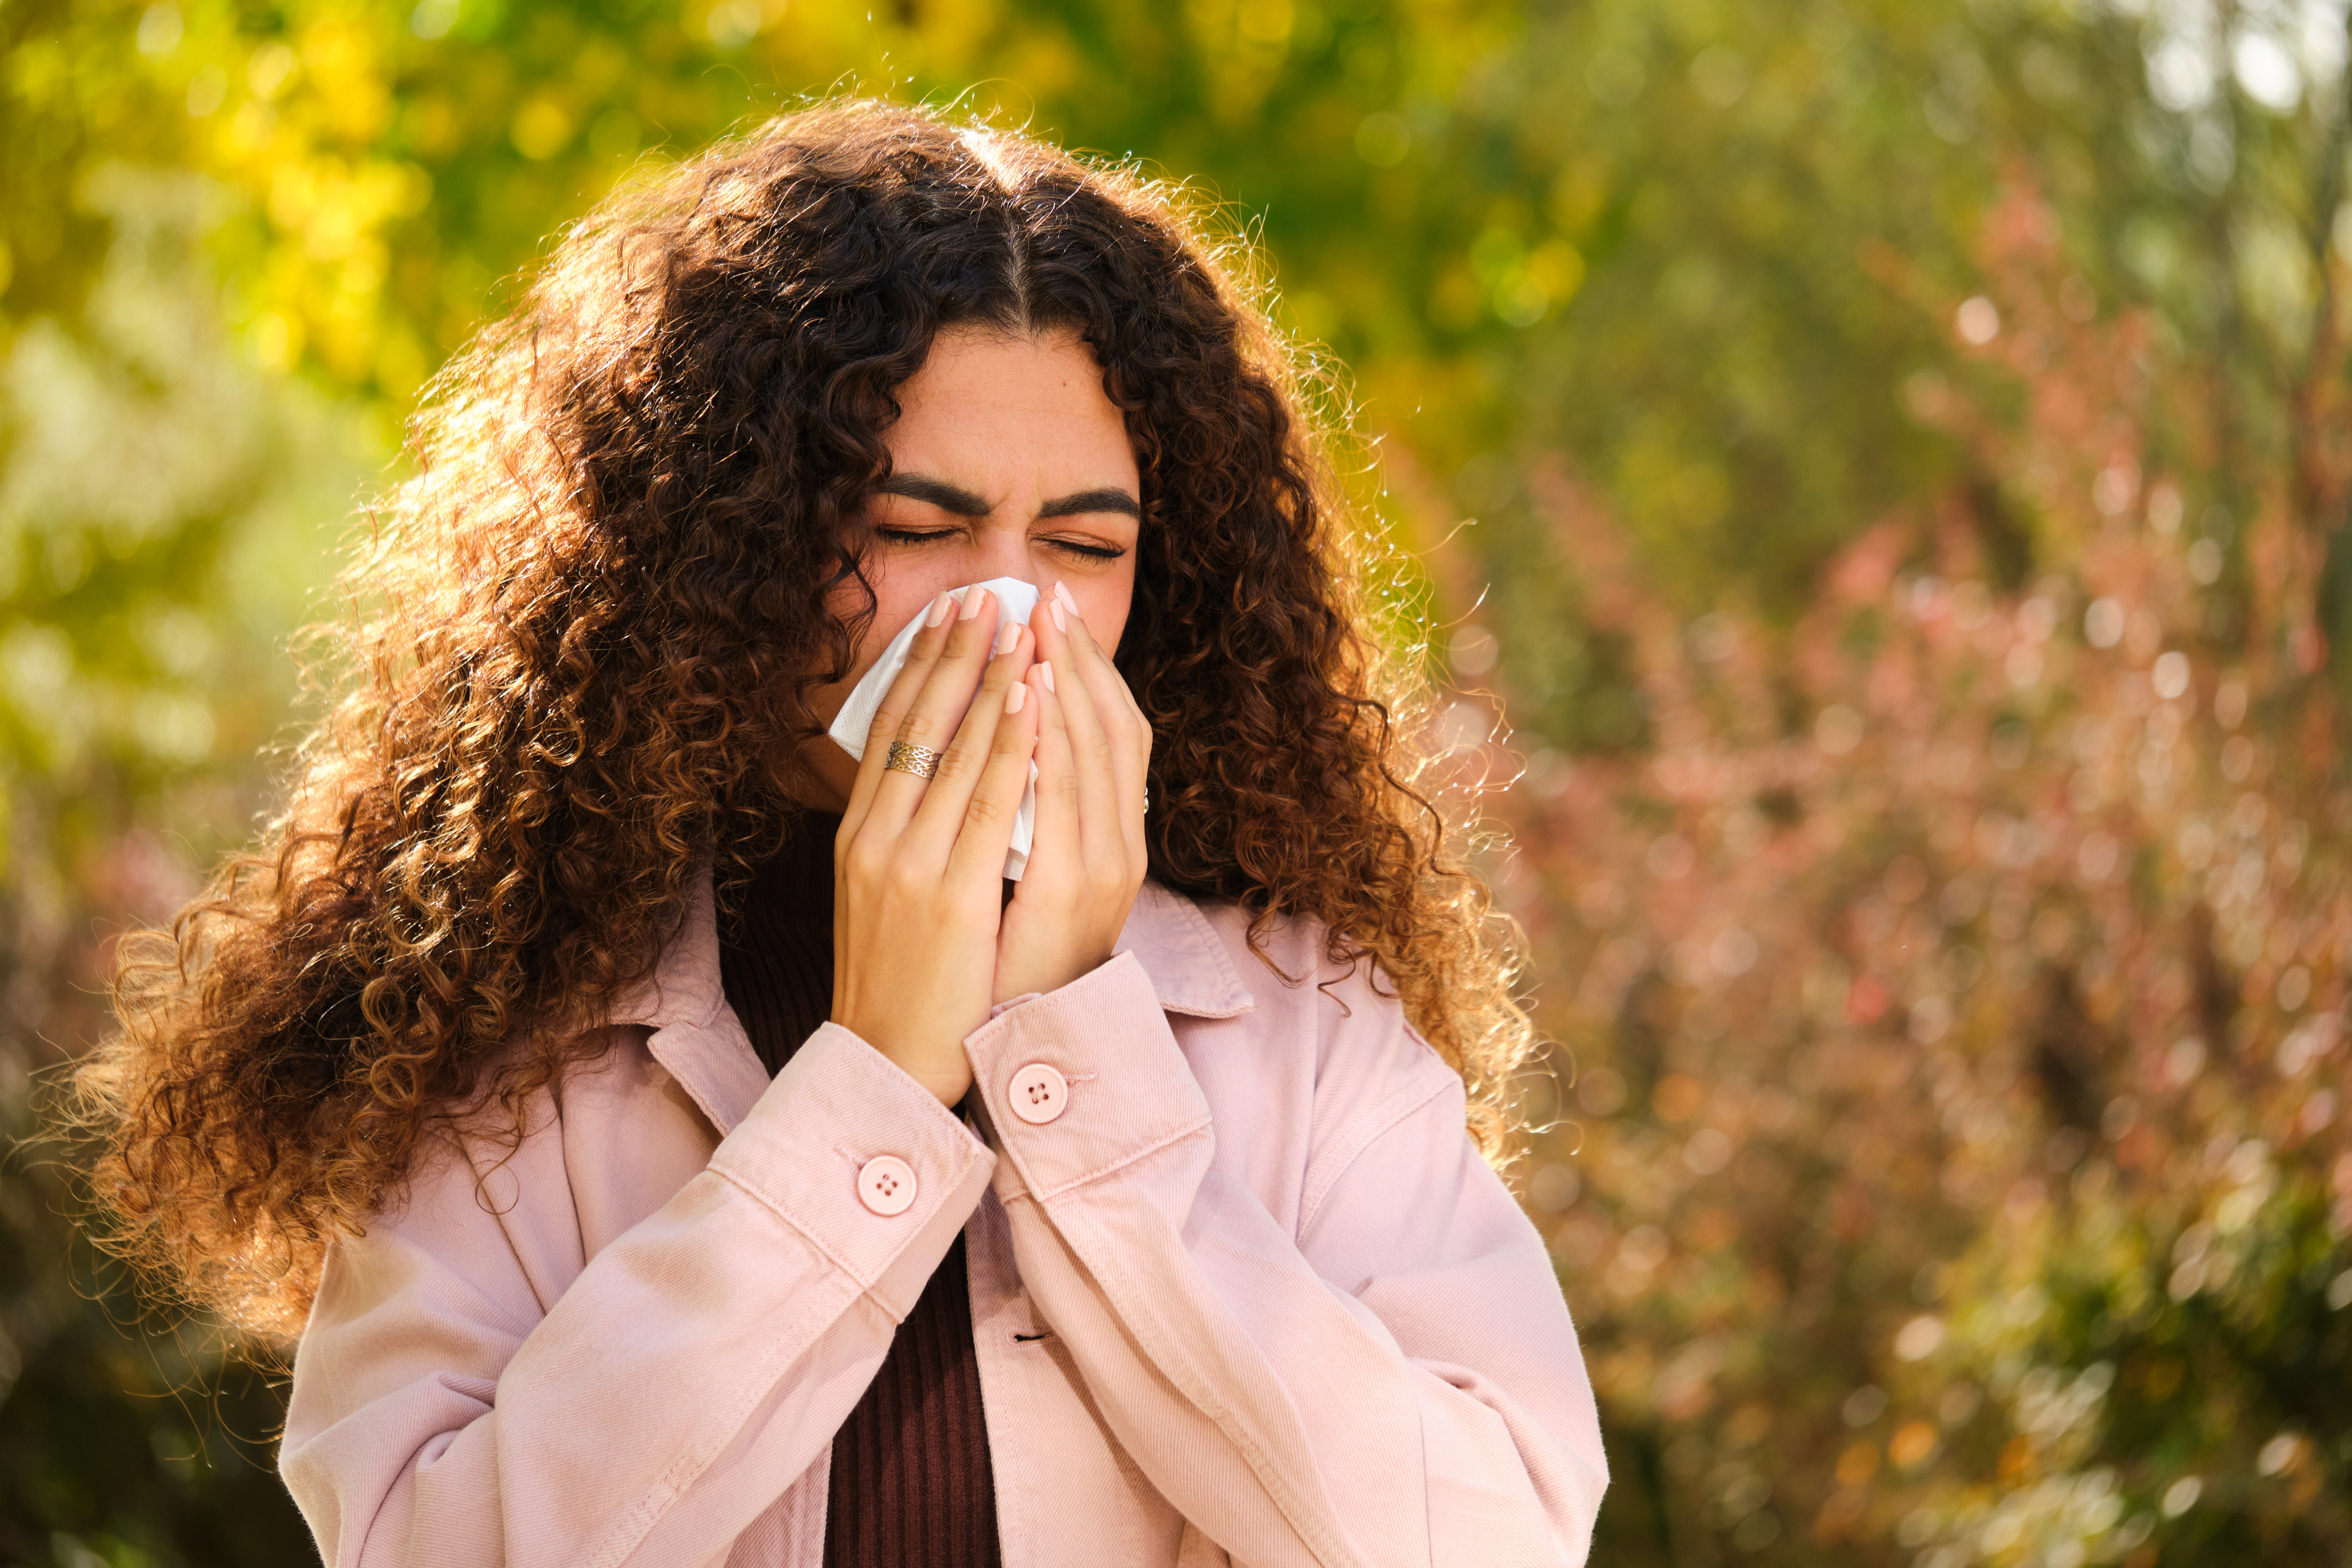 Person sneezing into a tissue, possibly due to allergies, concept for health impact on work productivity